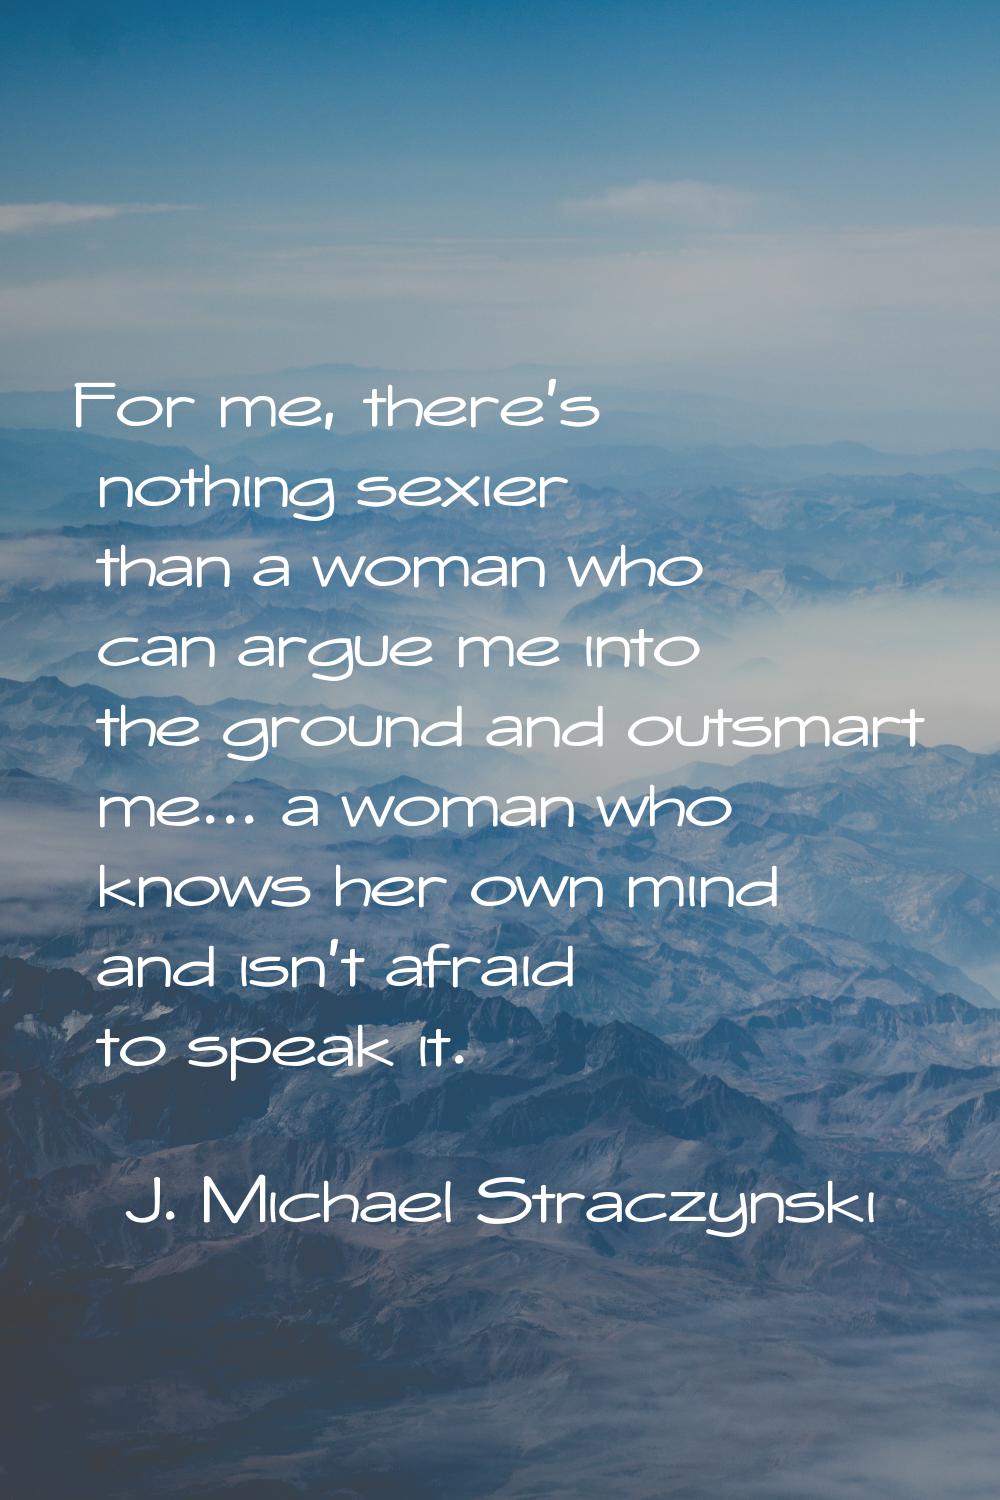 For me, there's nothing sexier than a woman who can argue me into the ground and outsmart me... a w